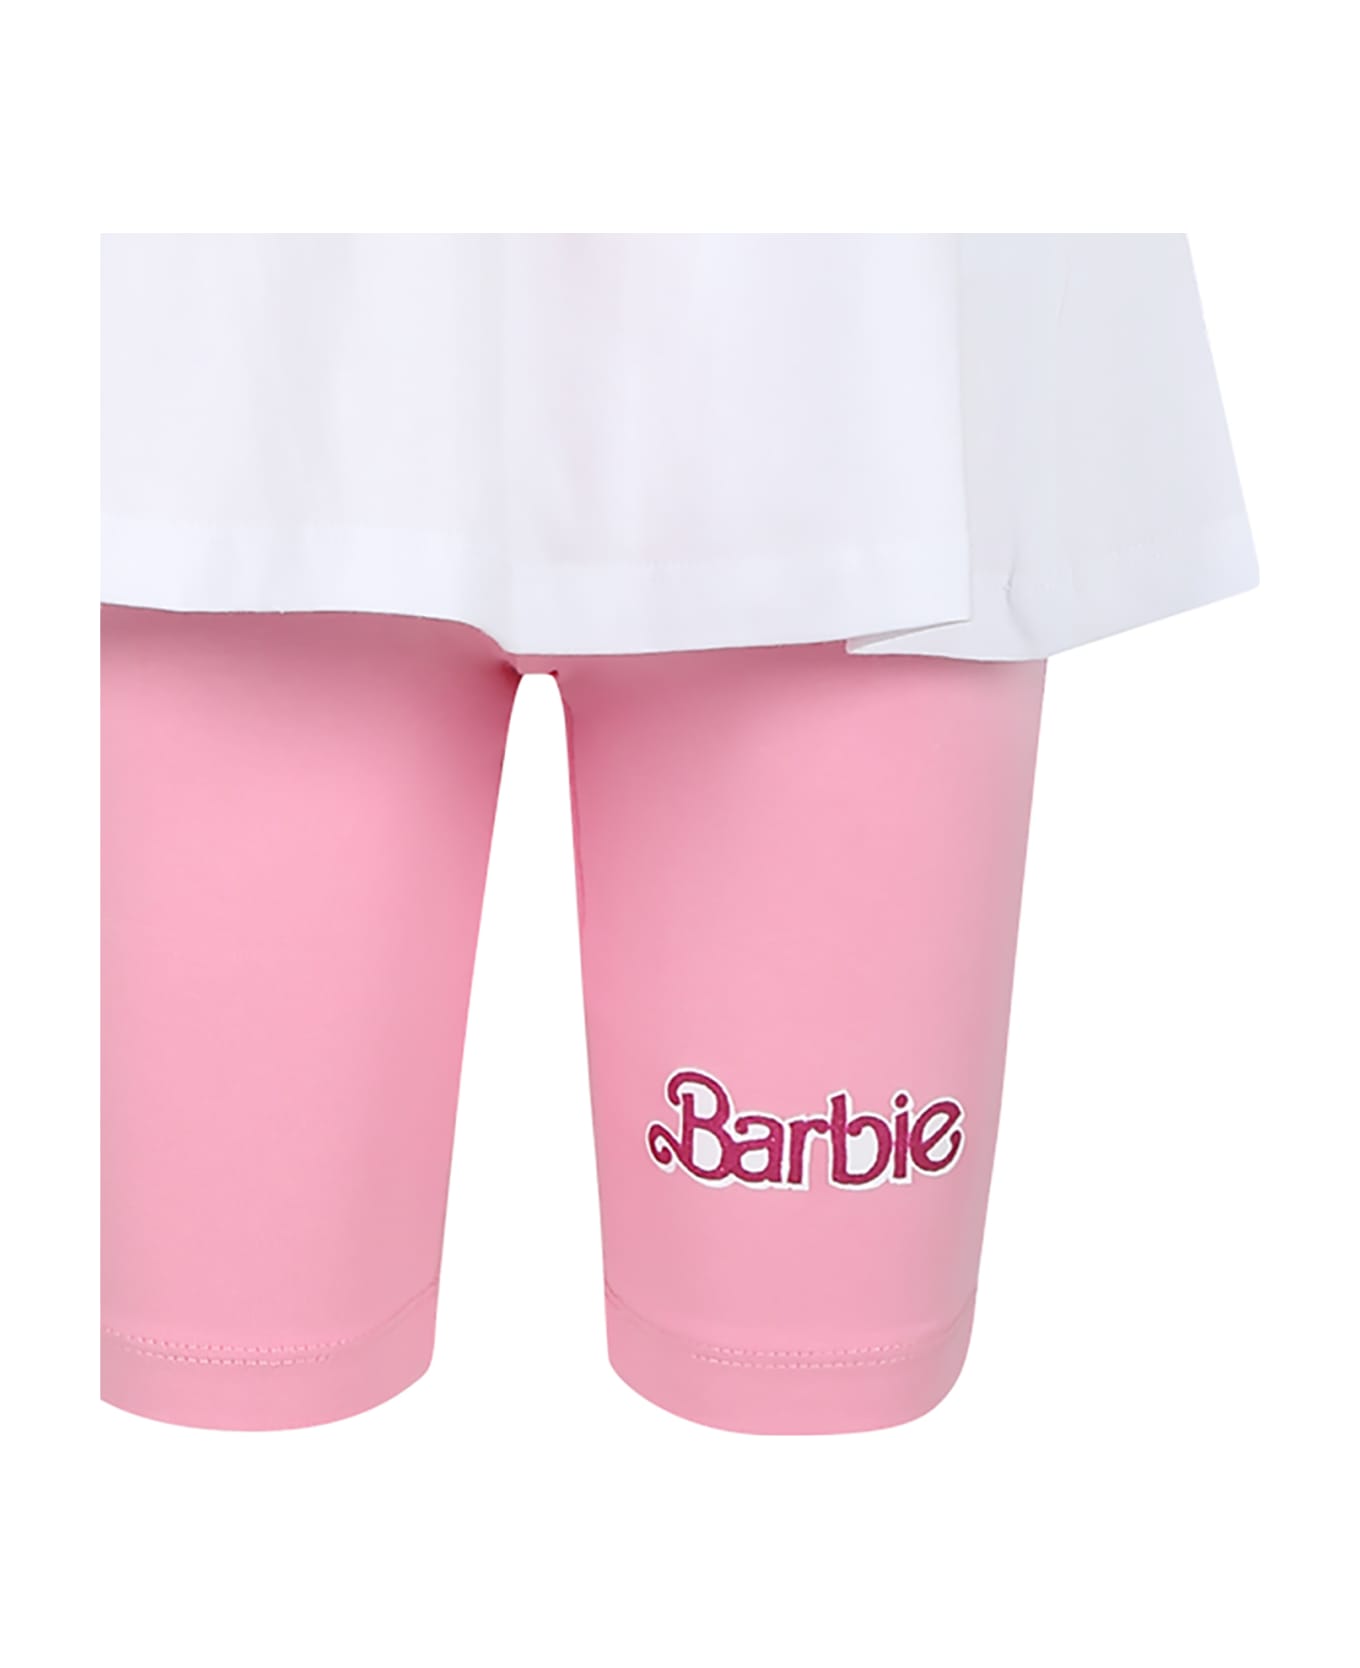 Monnalisa White Suit For Girl With Barbie Print And Rhinestone - Multicolor ジャンプスーツ